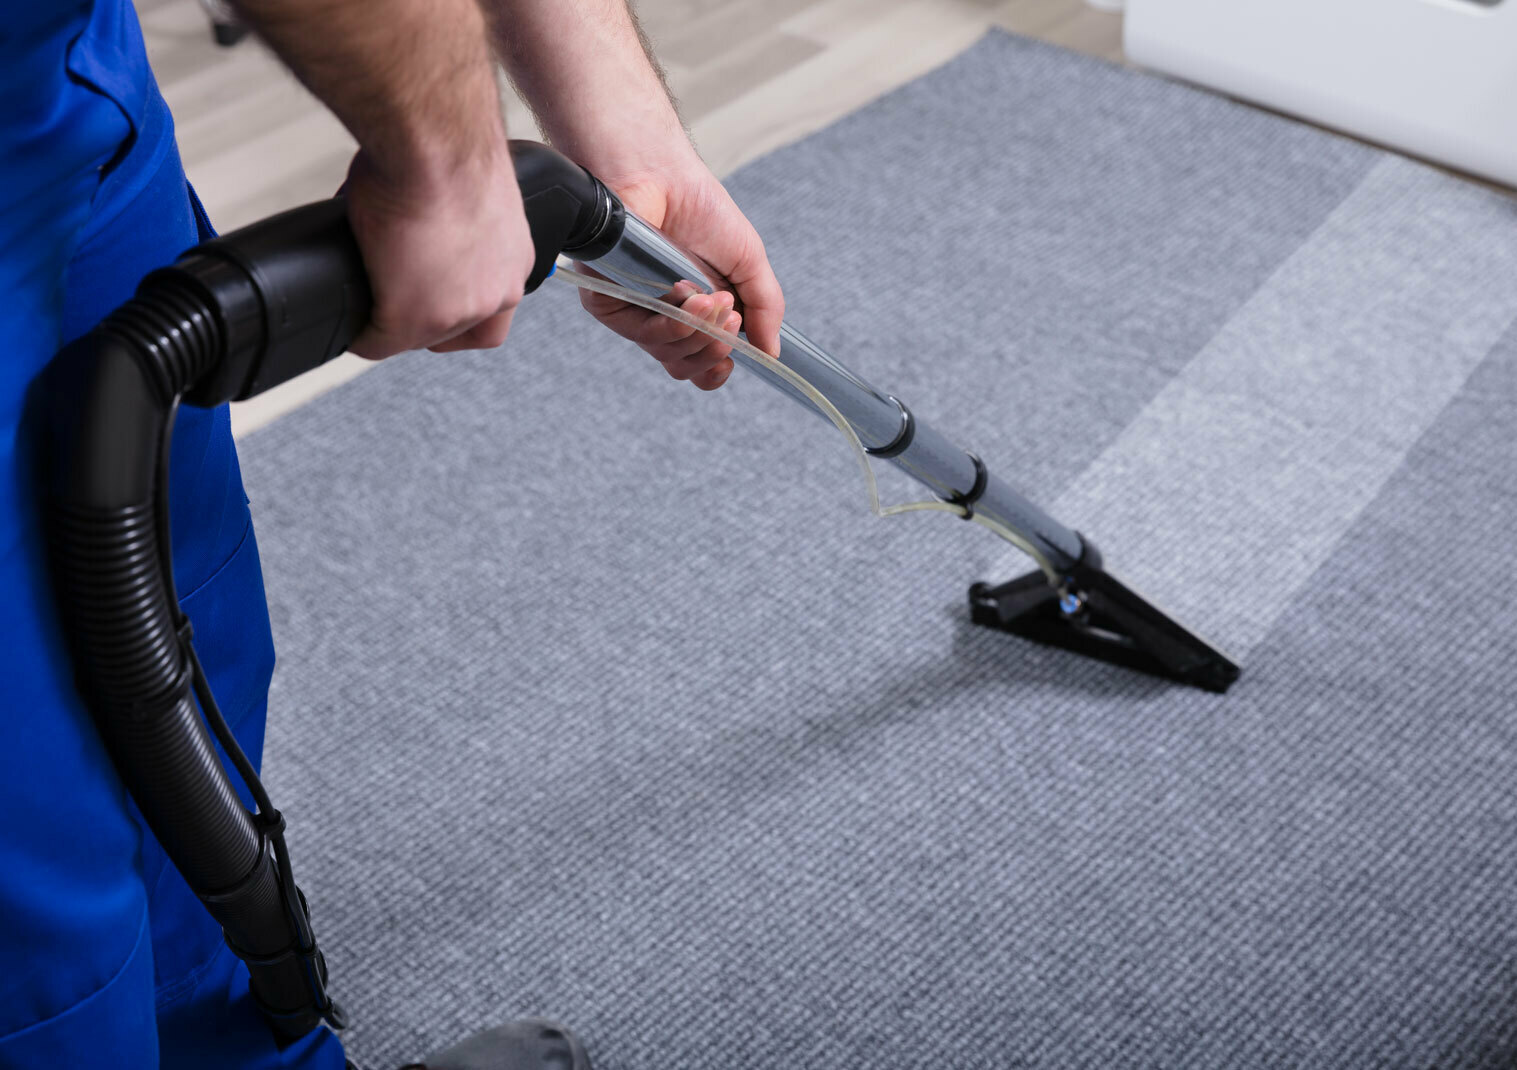 35% off a Professional Carpet Clean with CJ Cleaning Solutions